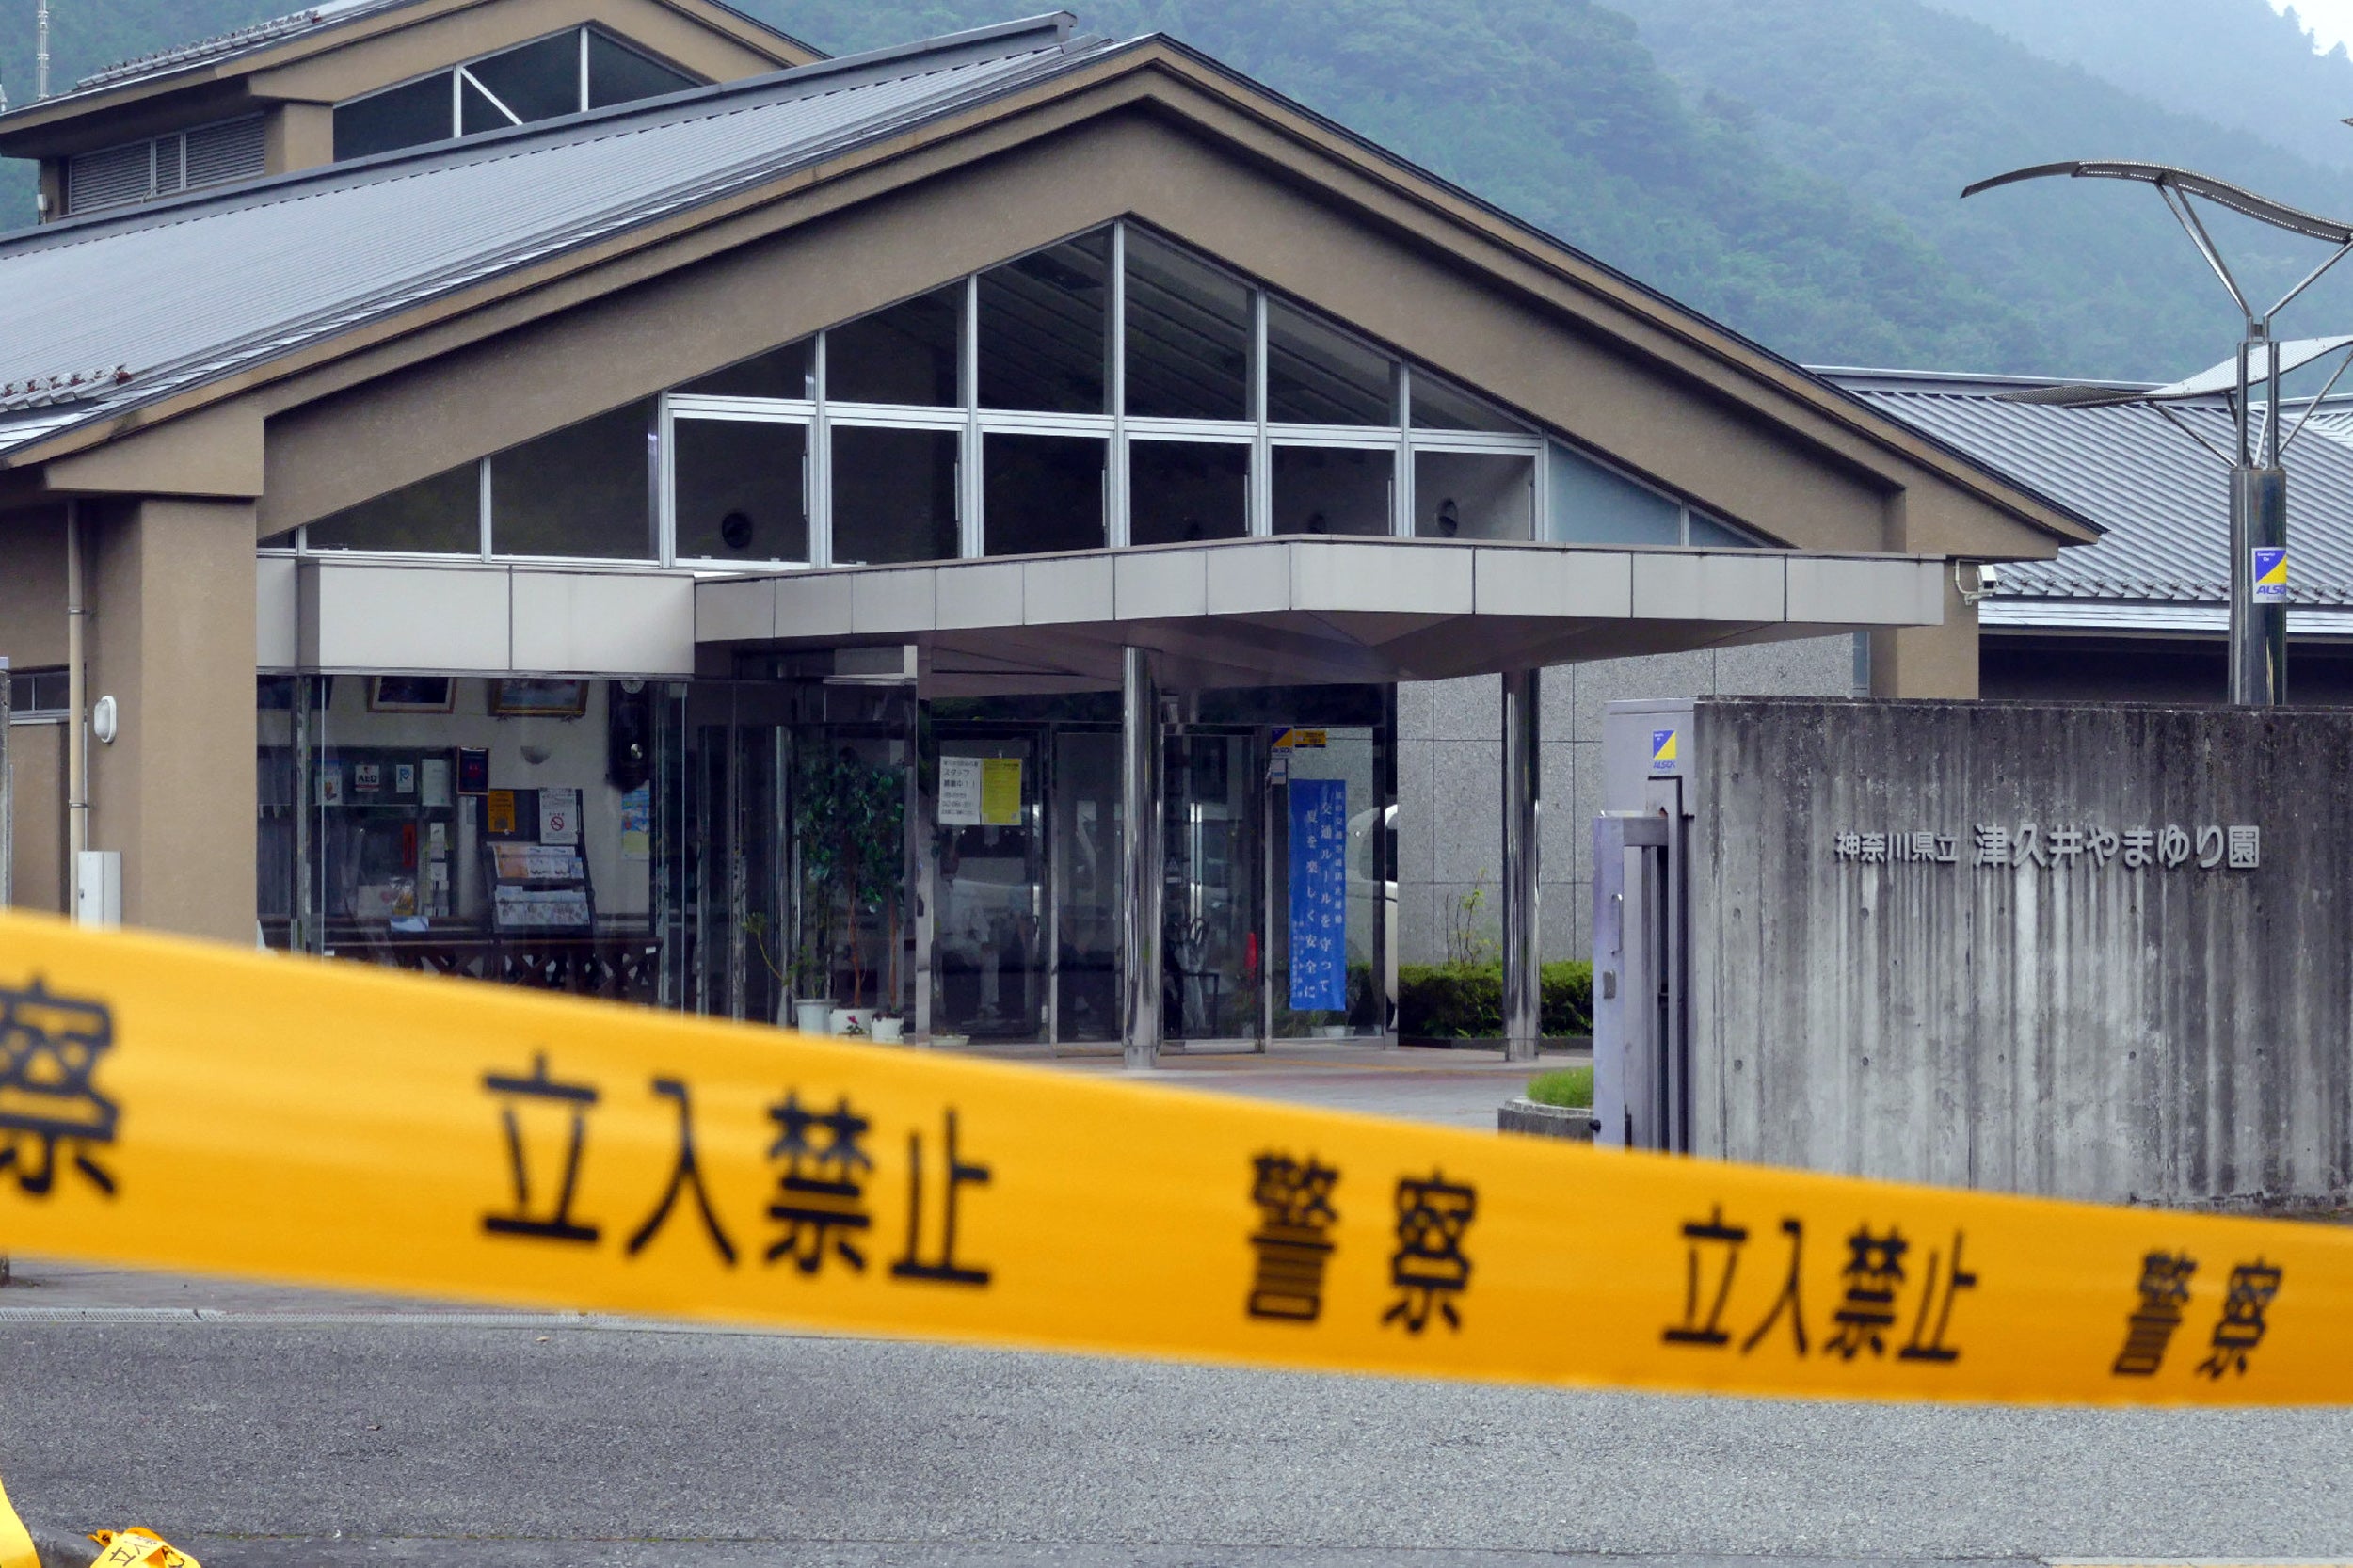 File image: There is a growing concern in Japan over a rising number of random stabbing attacks, as well as the use of explosives and homemade firearms